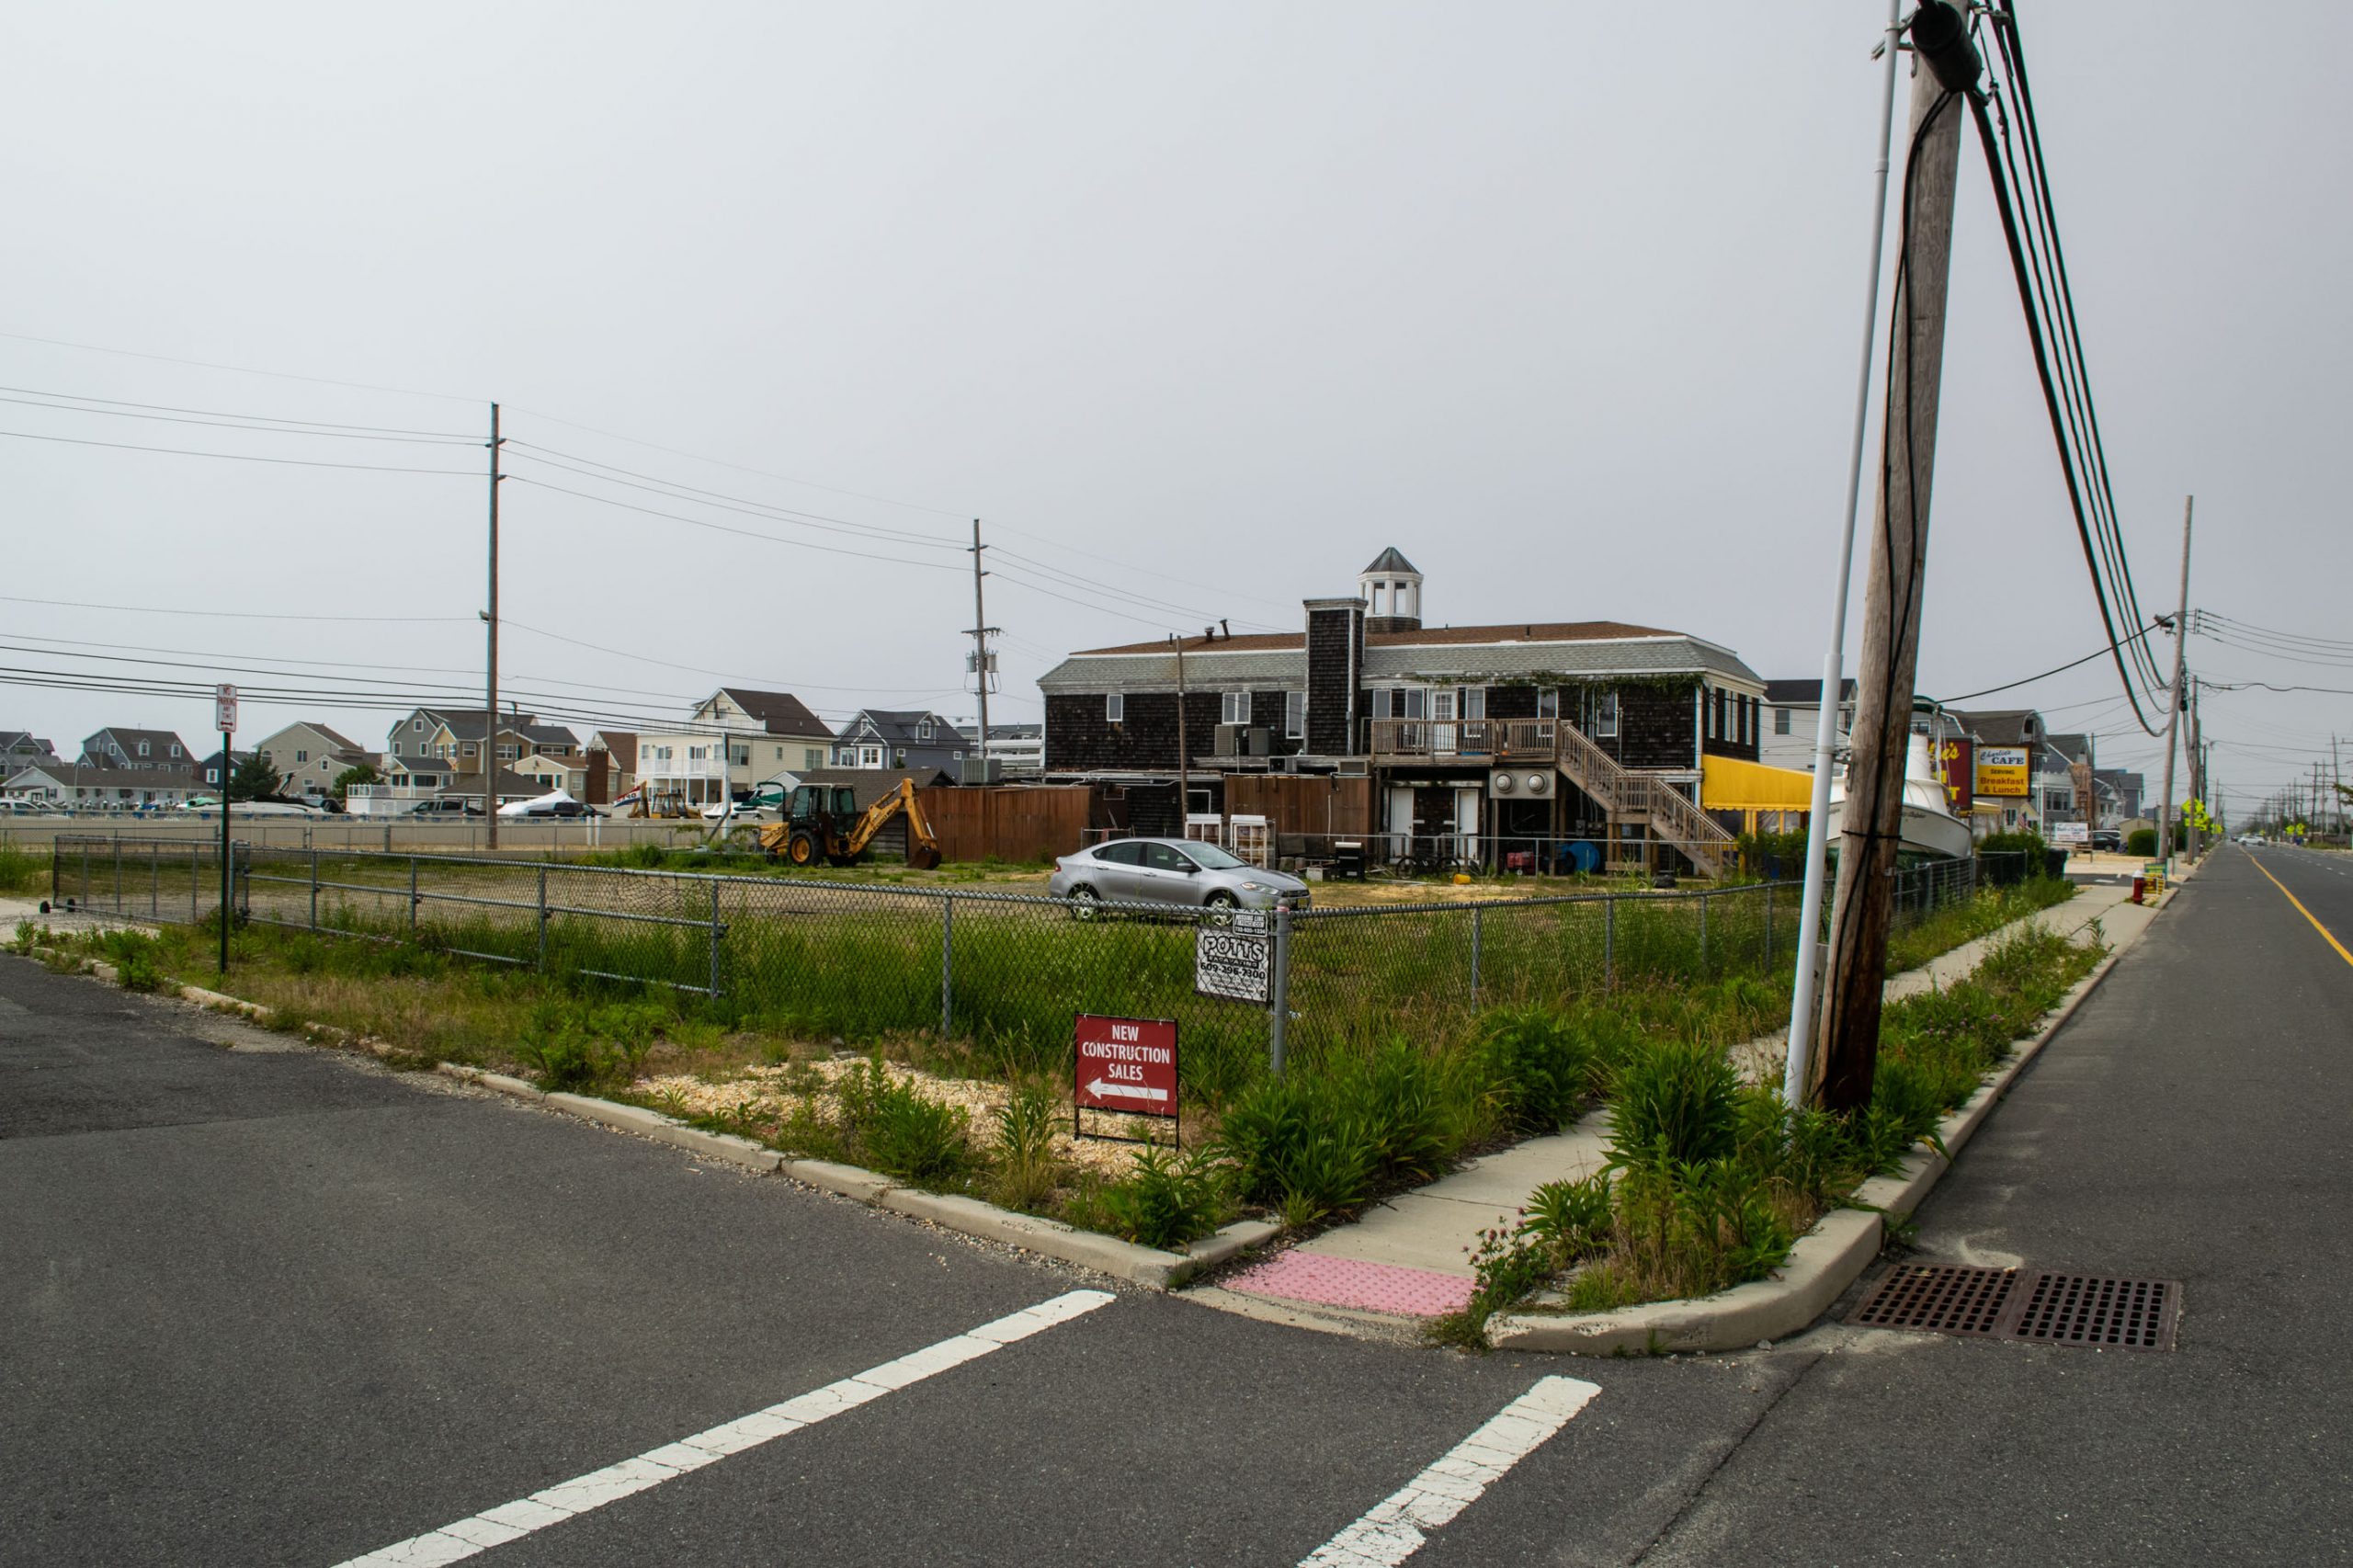 The Brick planning board approved the construction of three new homes along Route 35, June 2020. (Photo: Daniel Nee)